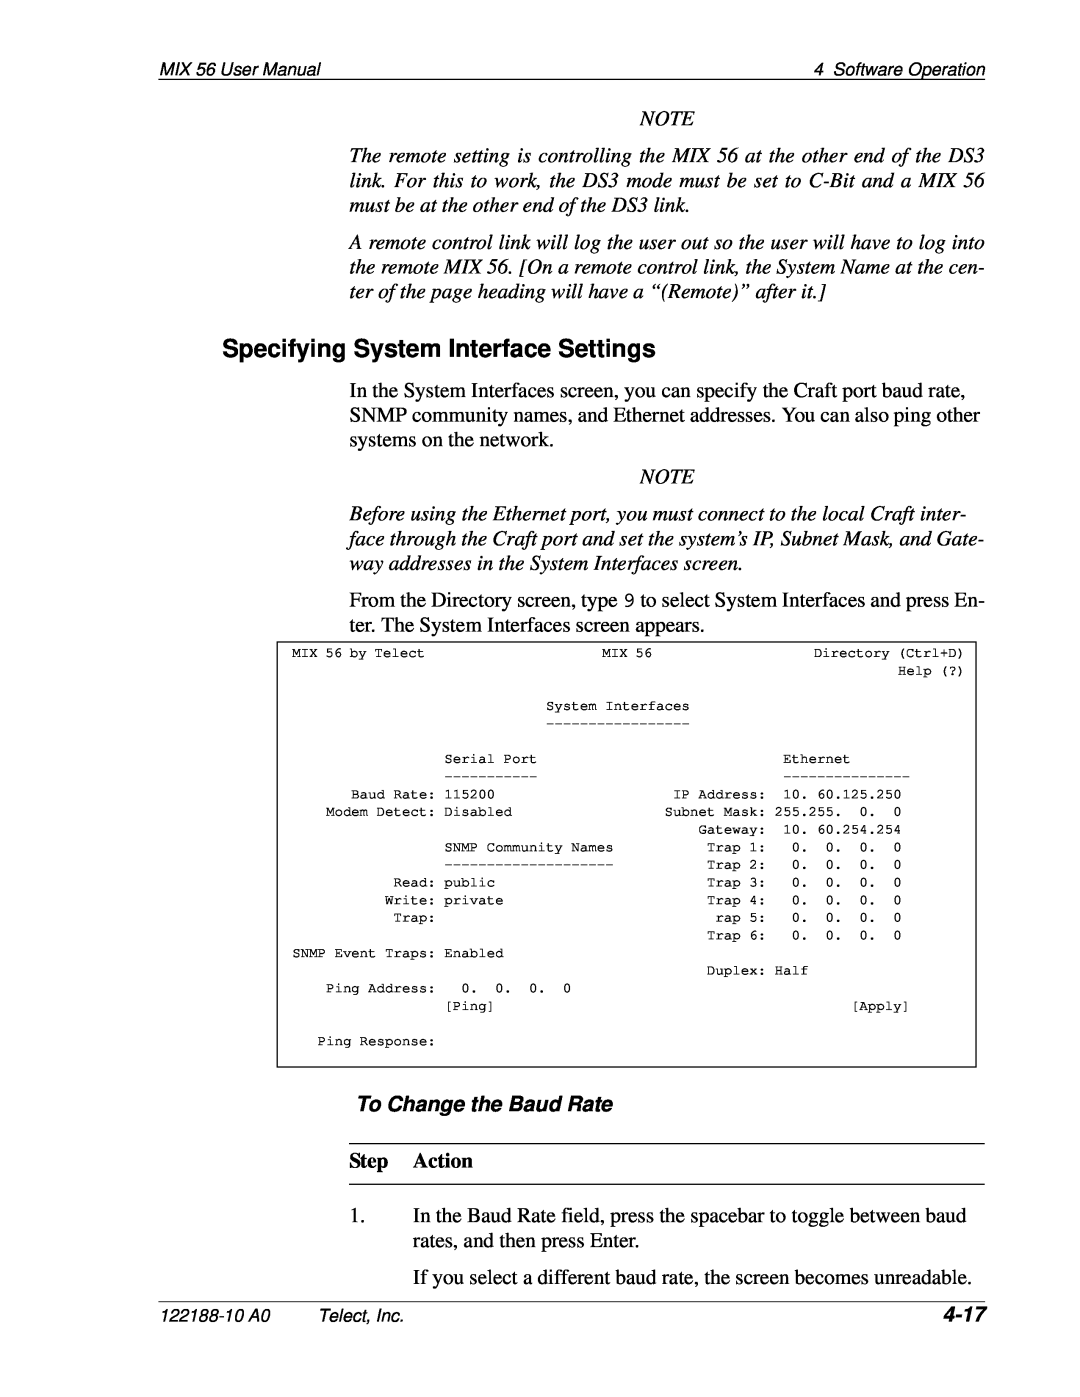 Telect MIX 56 user manual Specifying System Interface Settings, To Change the Baud Rate, 4-17, Step Action 